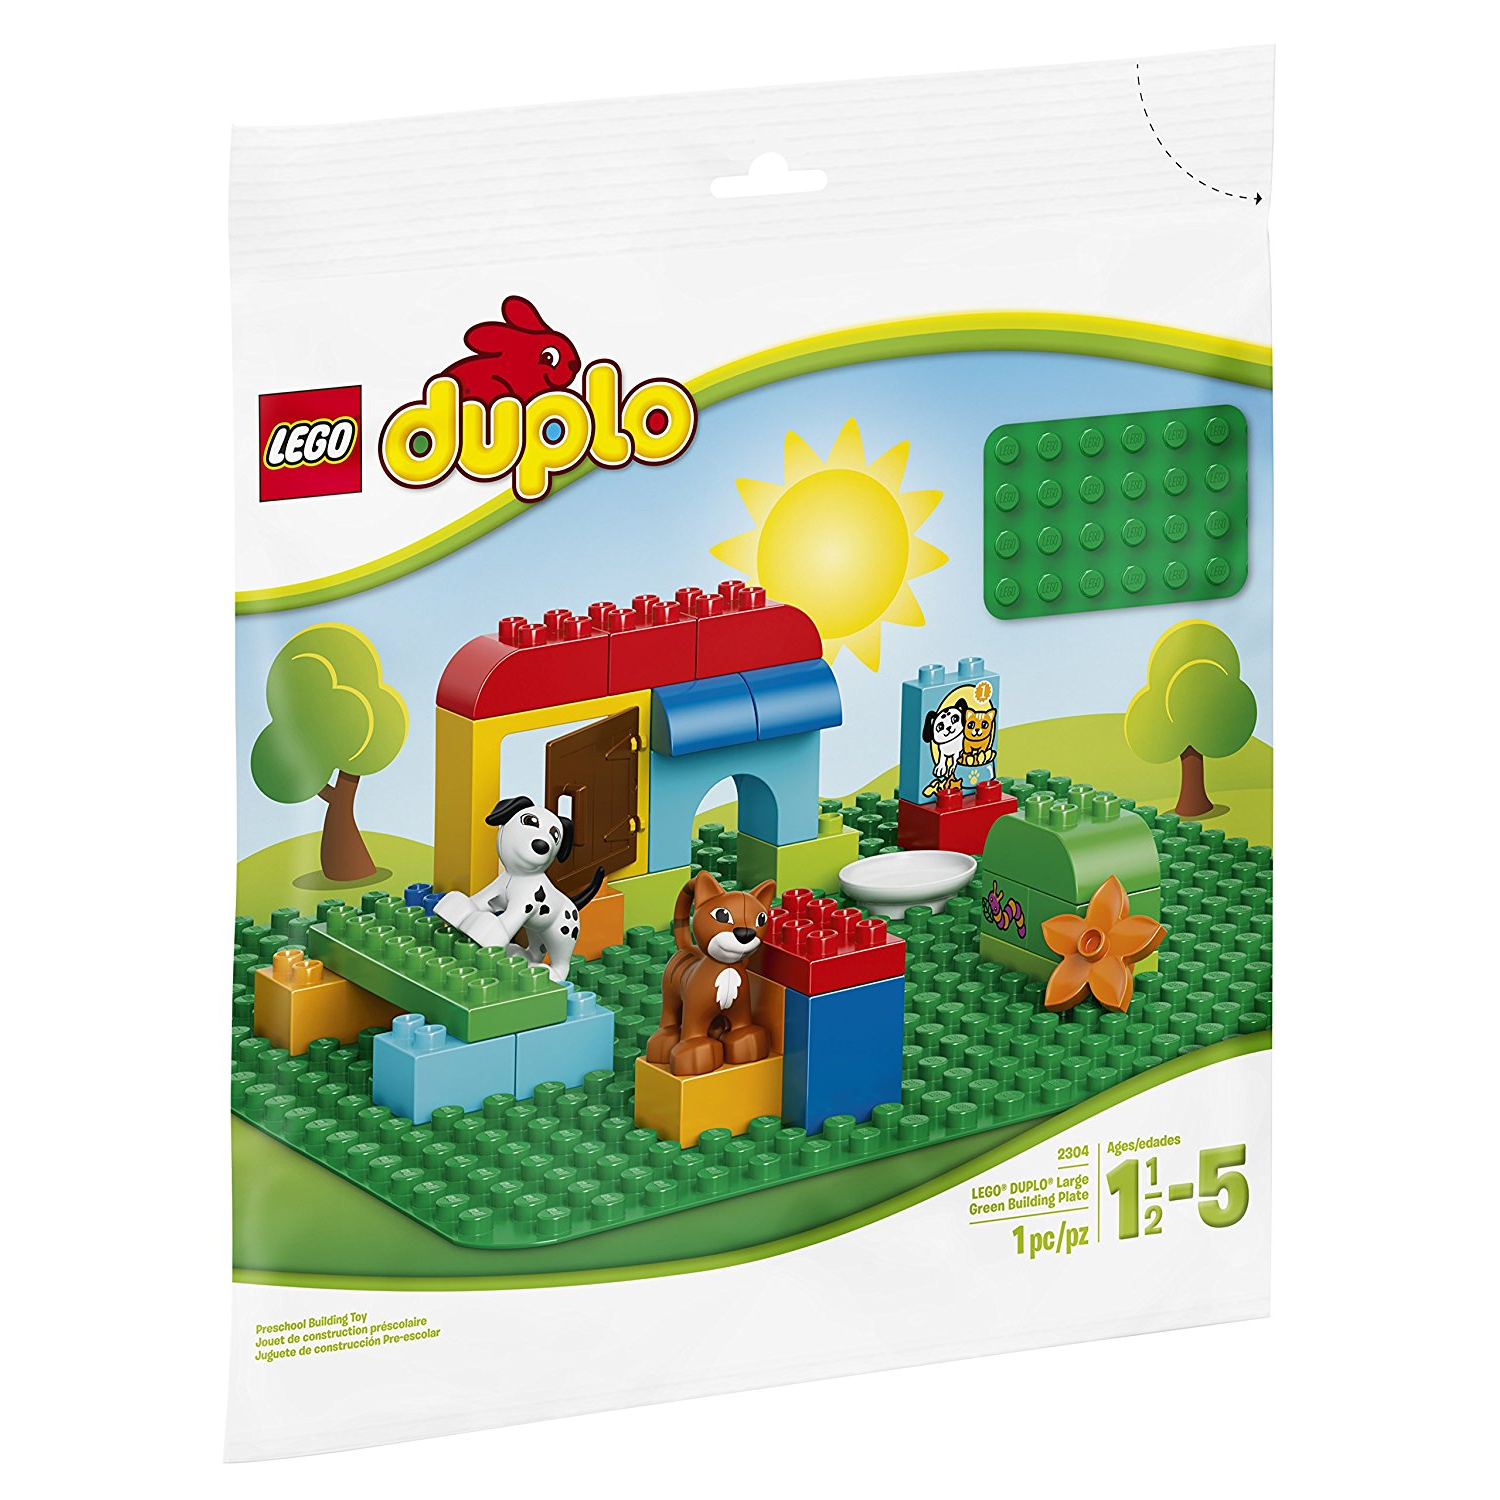 LEGO Duplo Large Green Building Plate Only $10.49 on Amazon!